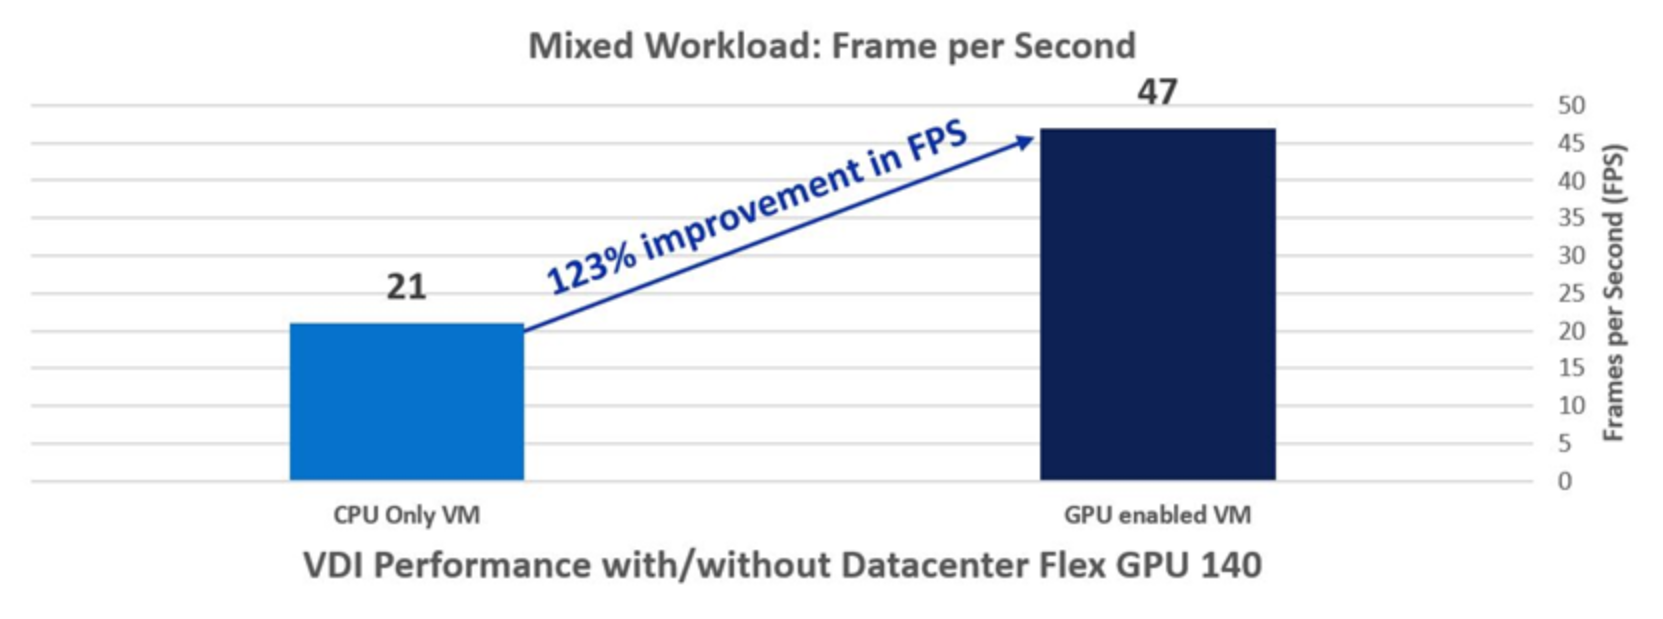 This graph shows the Frames per second for VDI Performance with and without datacenter flex GPU 140. There is a 123% improvement in FPS from 21 for CPU-only VMs to 47 for GPU-enabled VMs.